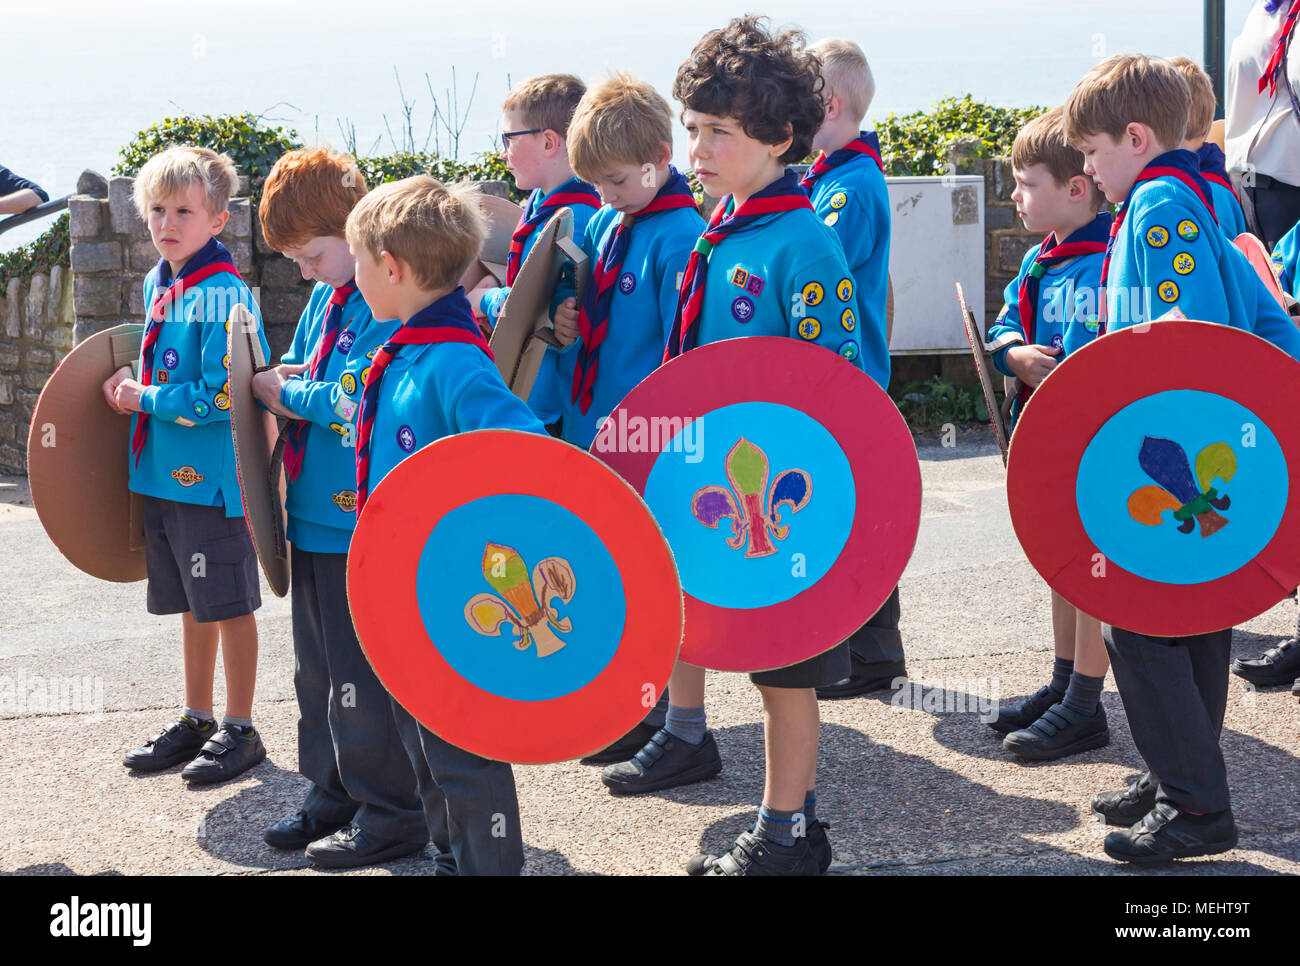 Bournemouth, Dorset, UK 22nd April 2018. Warm sunny weather as hundreds turn out to support the St George's Day scouts parade in Bournemouth. Youngsters boys and girls scouts cubs beavers celebrate Saint Georges day taking part in the procession. Beavers with their home made crafted shields made from card cardboard. Credit: Carolyn Jenkins/Alamy Live News Stock Photo